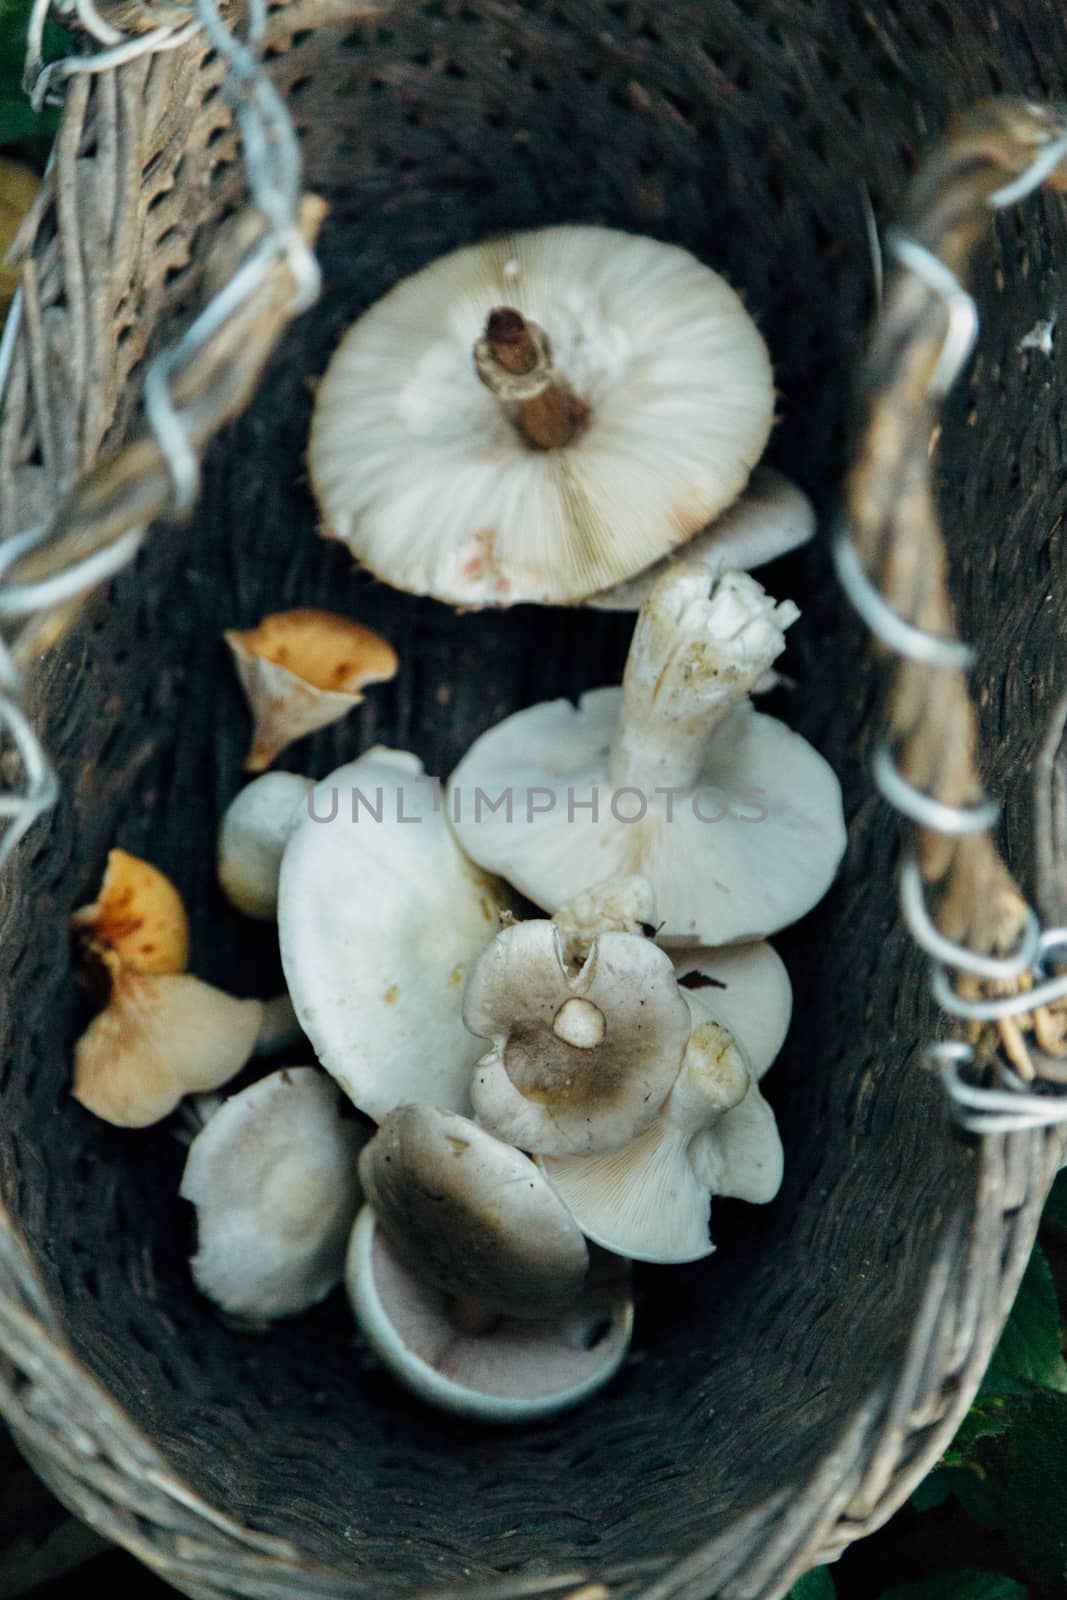 Forest mushrooms in the basket. Harvesting. Autumn